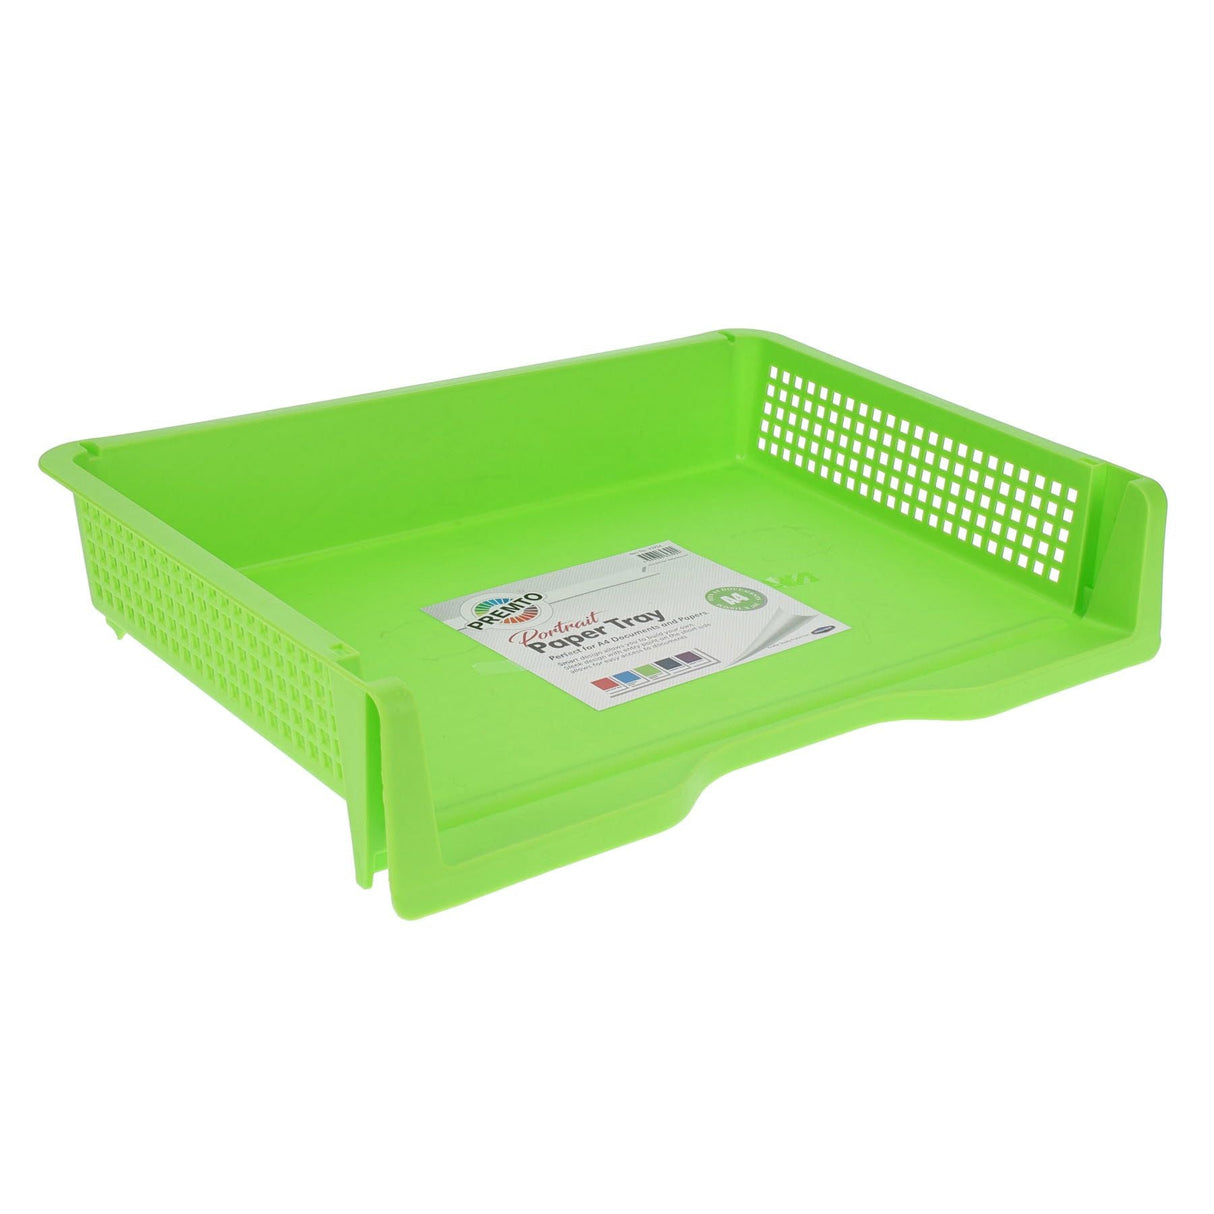 Premto A4 Paper Tray - Caterpillar Green | Stationery Shop UK